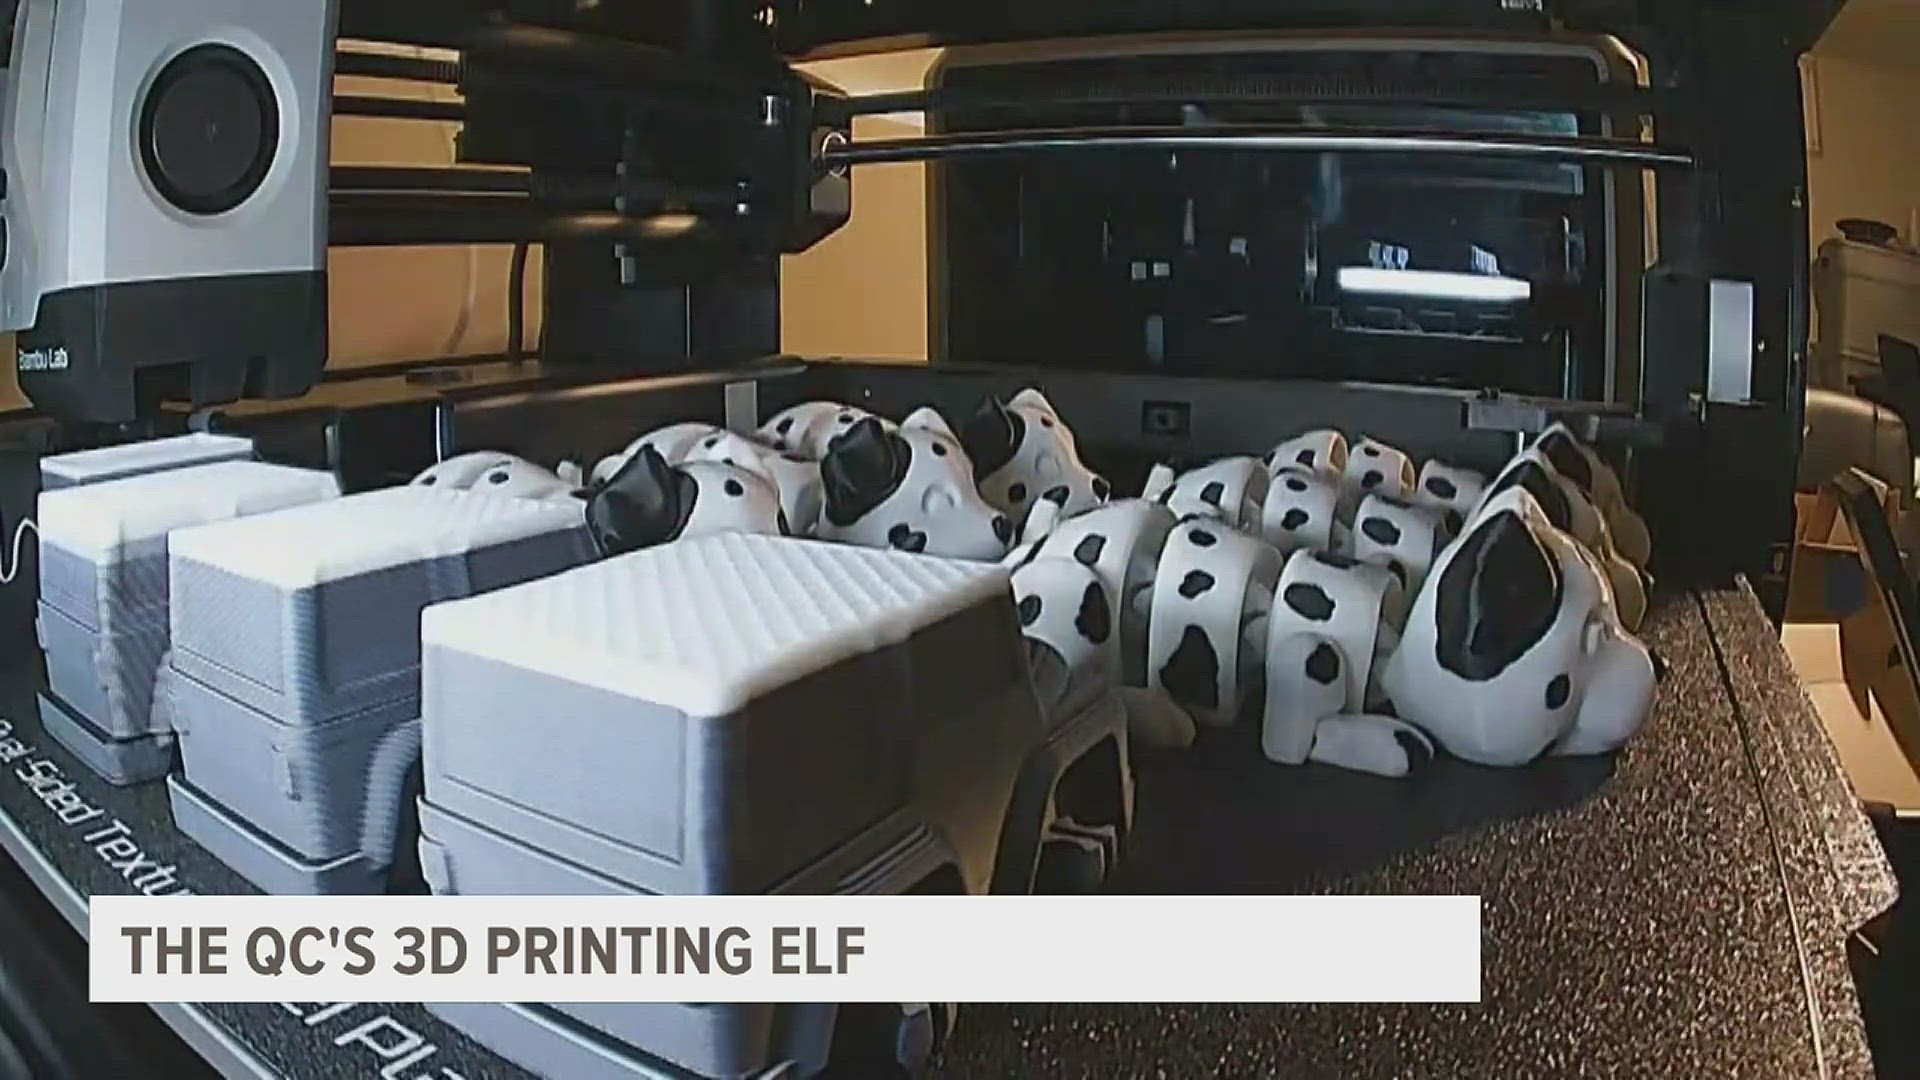 This year, Dylan Bowen was able to 3D print 3,211 toys for Toys for Tots.